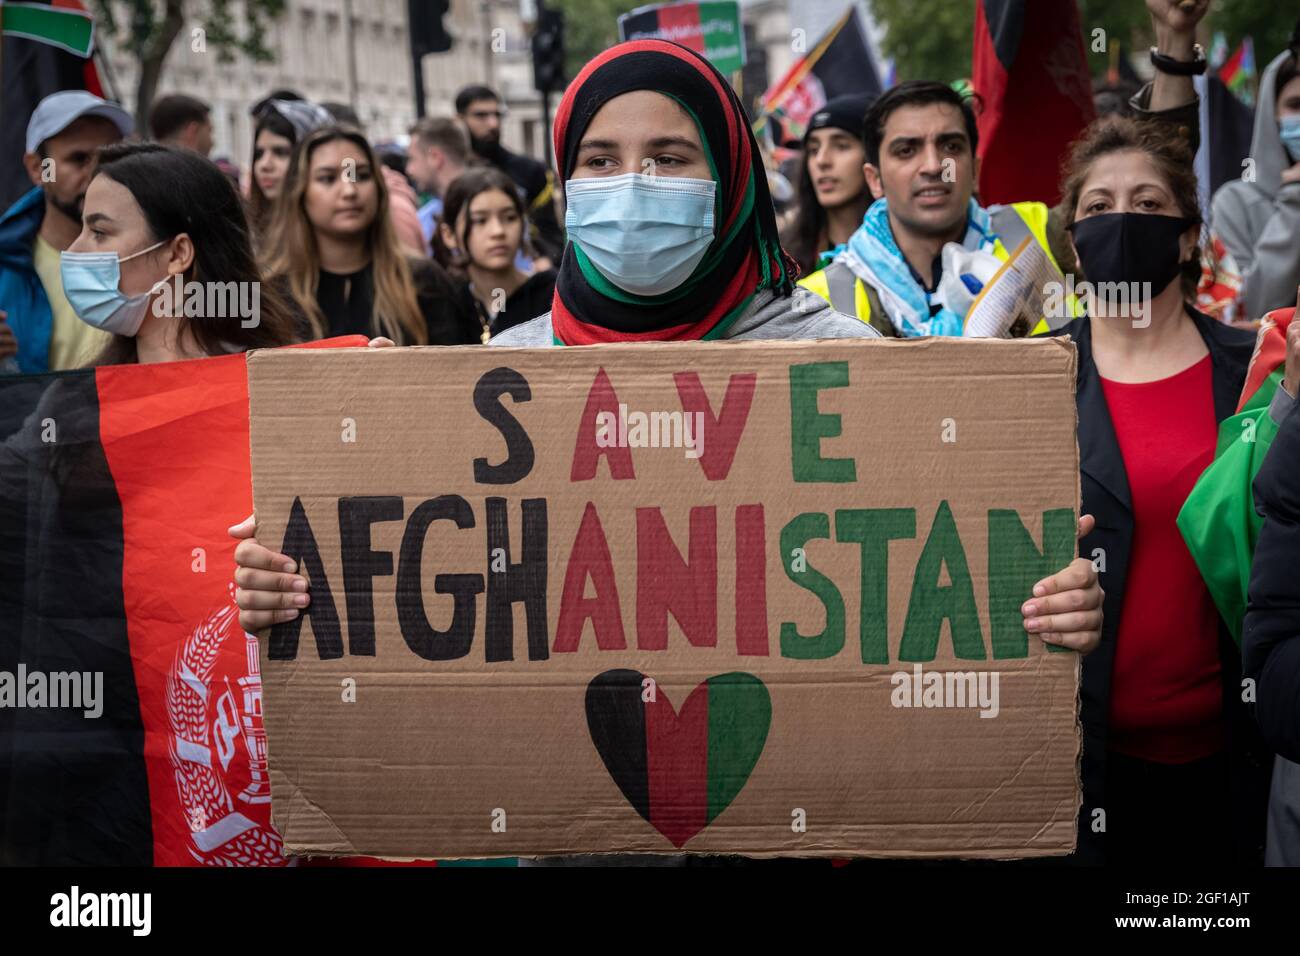 London, UK. 21st August, 2021. 'Stop Killing Afghans' mass protest march. Thousands of British-Afghans march from Marble Arch to Westminster in protest at the recent Taliban power grab of all major cities in Afghanistan. The protesters, many of them women, held placards reading “Stop the oppression of Afghan women”, “Afghanistan is bleeding” and “US & NATO failed”. Protesters were joined by people from Iran and Iraq who showed solidarity for the people in Afghanistan. Credit: Guy Corbishley/Alamy Live News Stock Photo